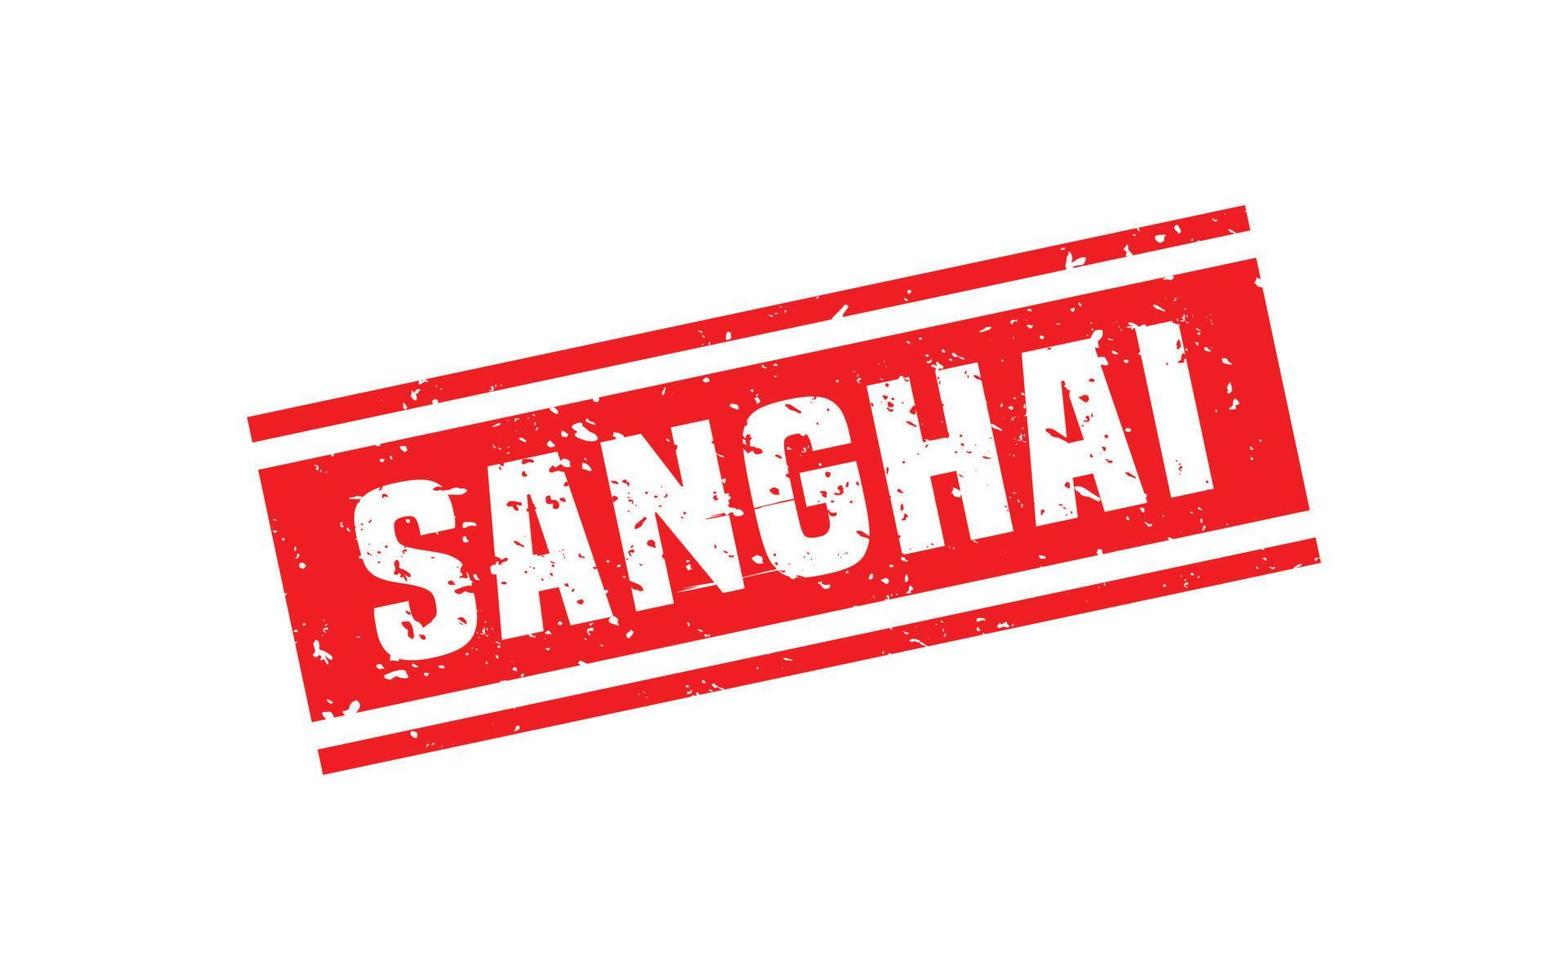 SANGHAI CHINA stamp rubber with grunge style on white background vector